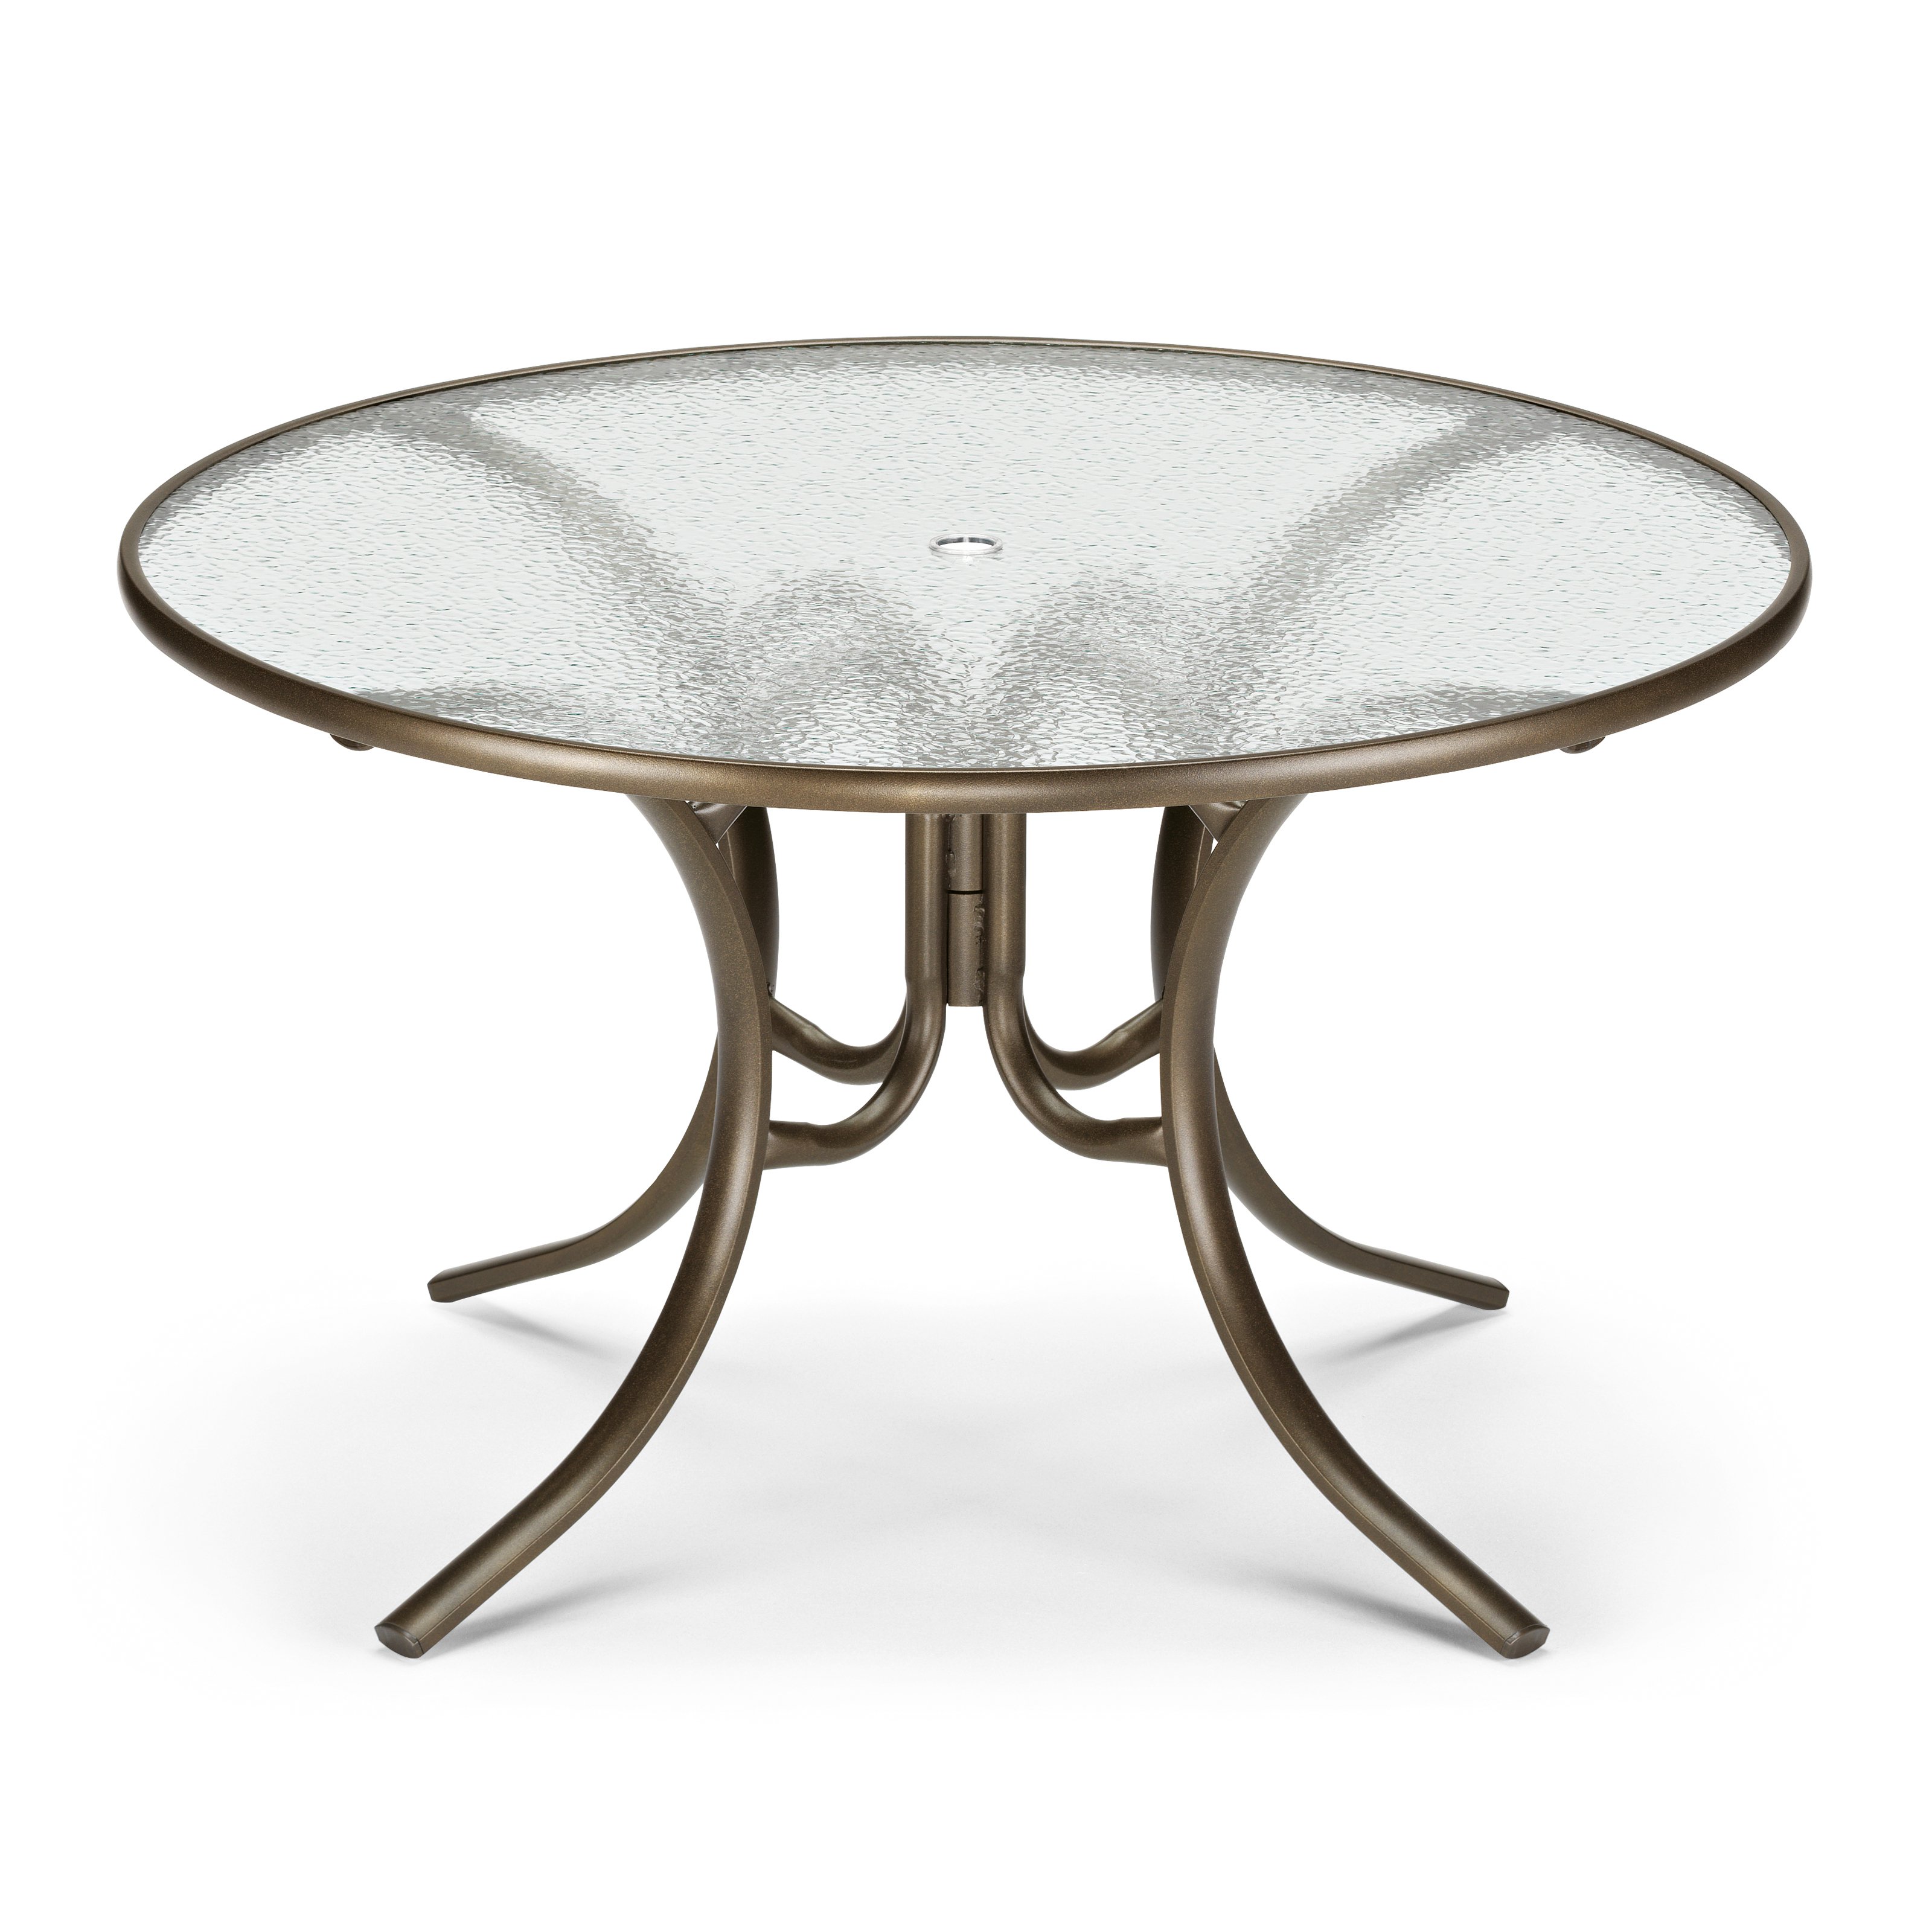 round patio table round glass top patio dining table - patio dining tables at hayneedle GENDWNF